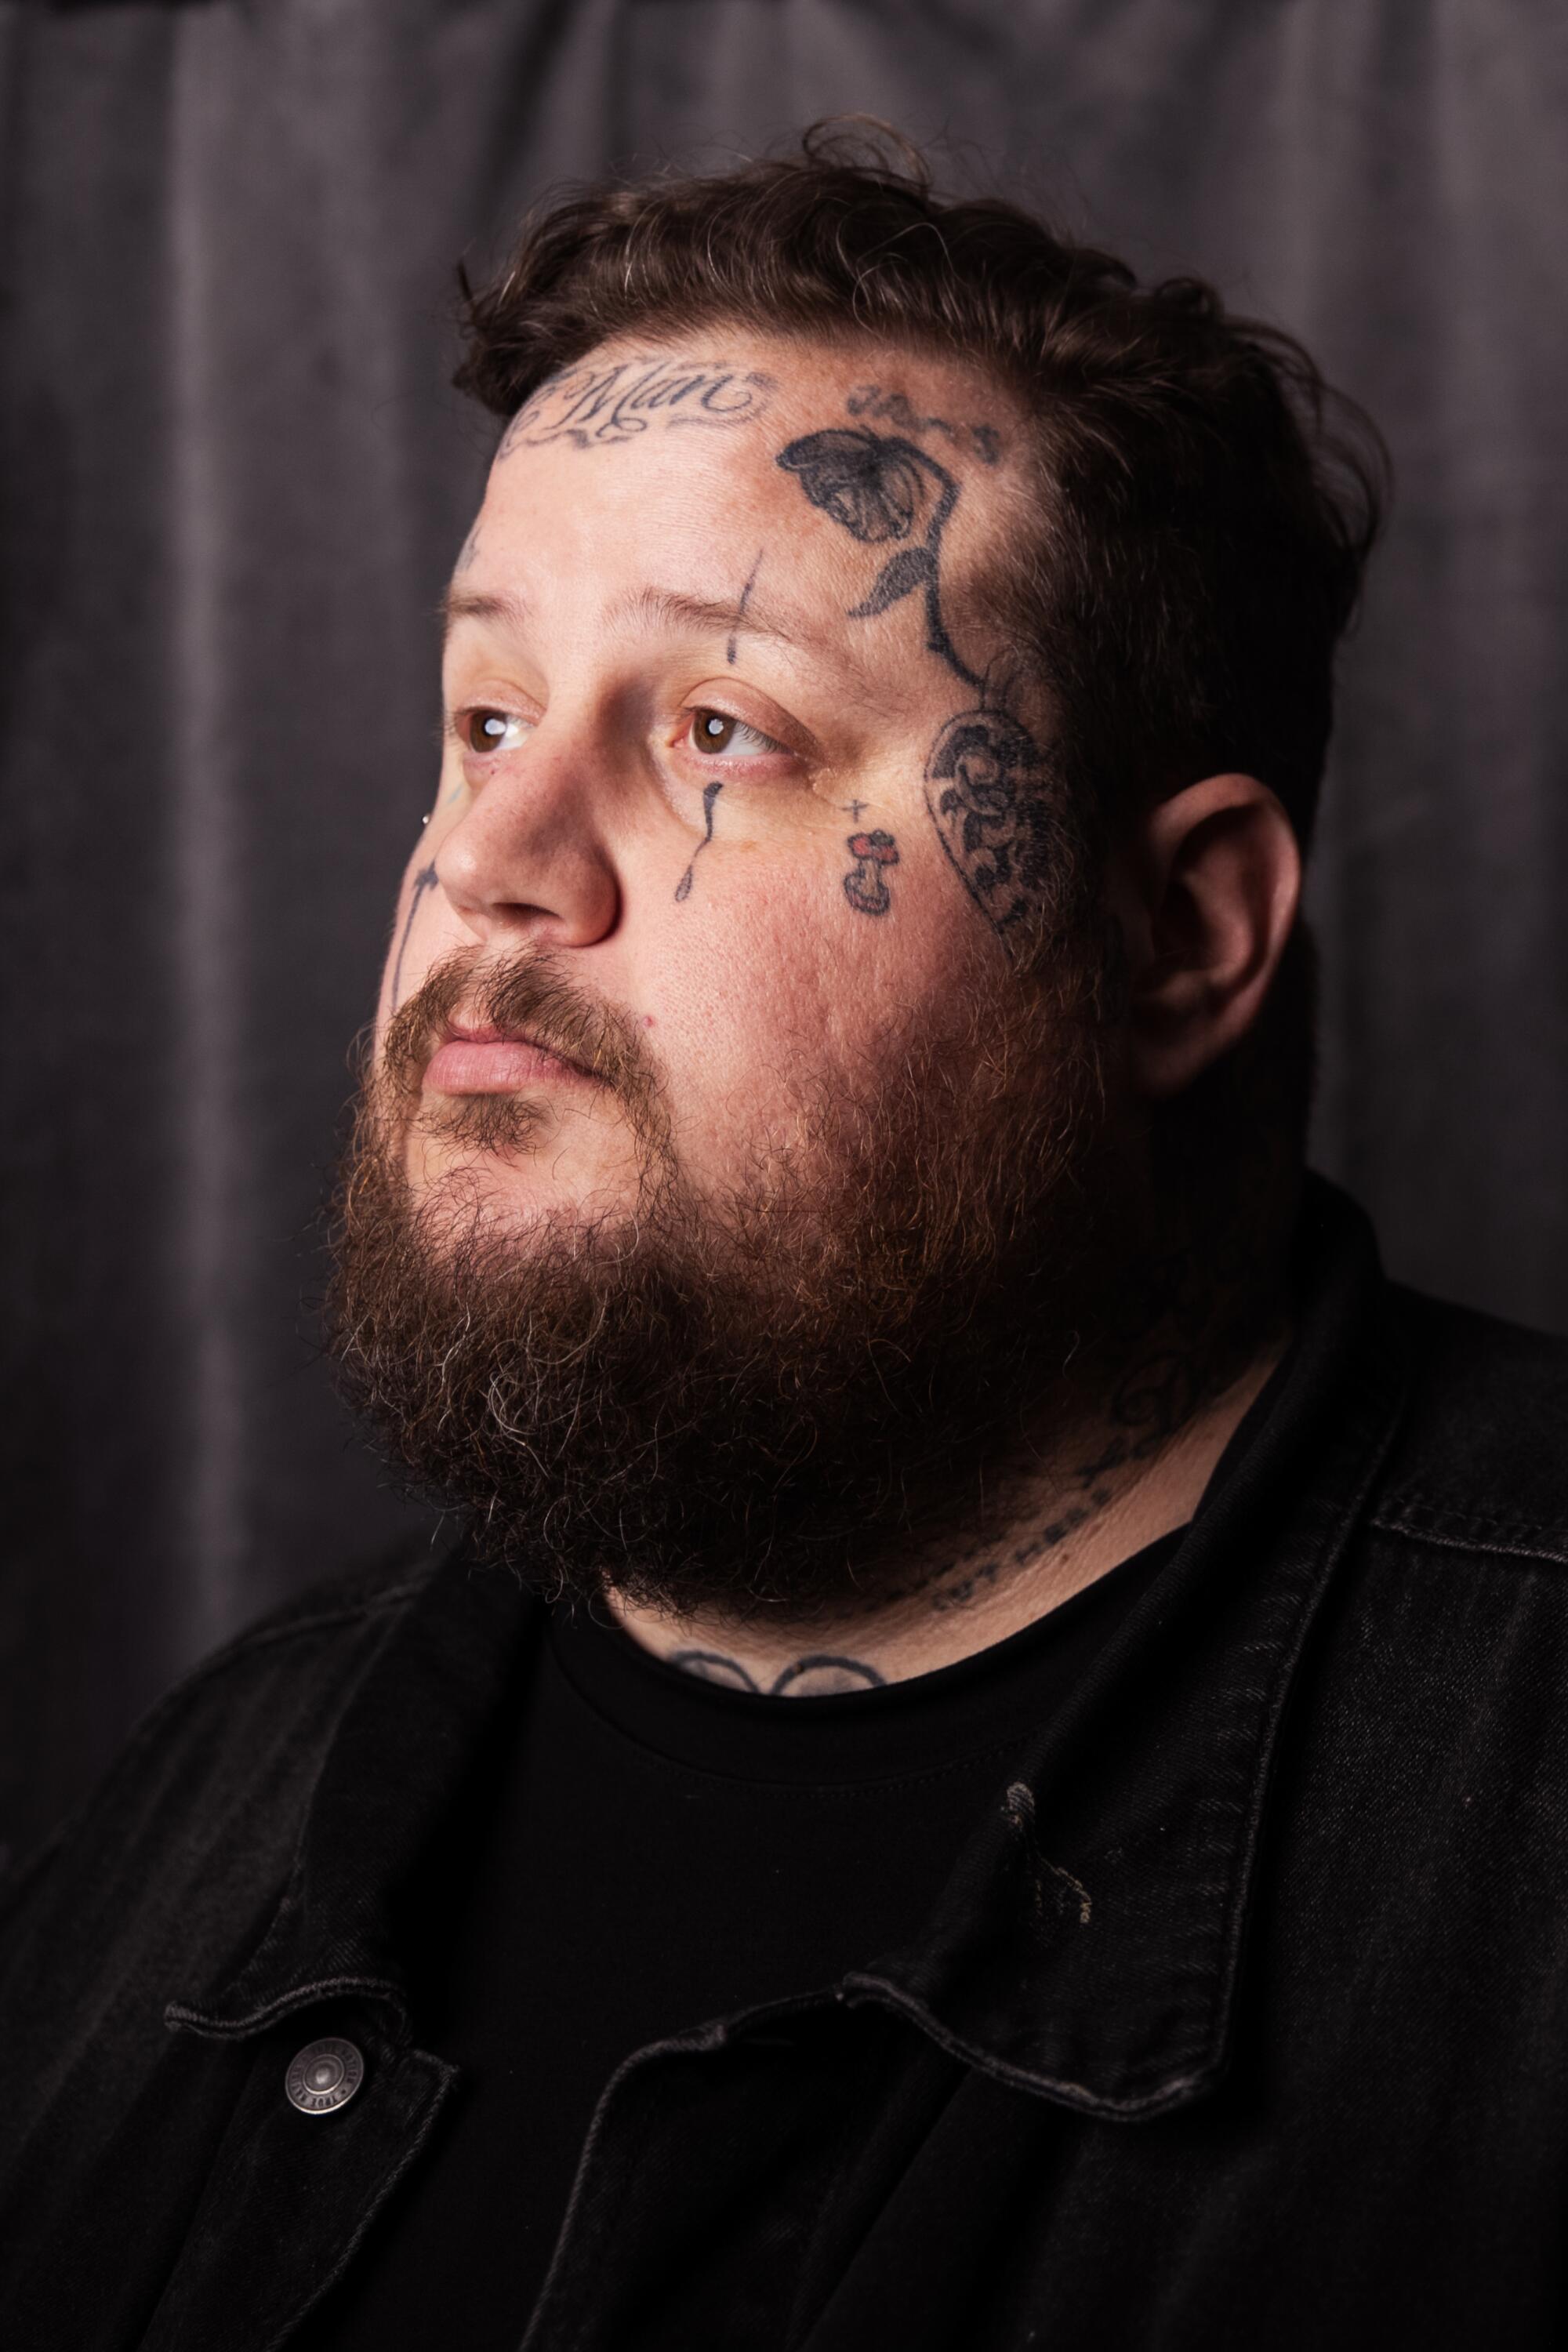 How Jelly Roll became the new (tattooed) face of country - Los Angeles Times